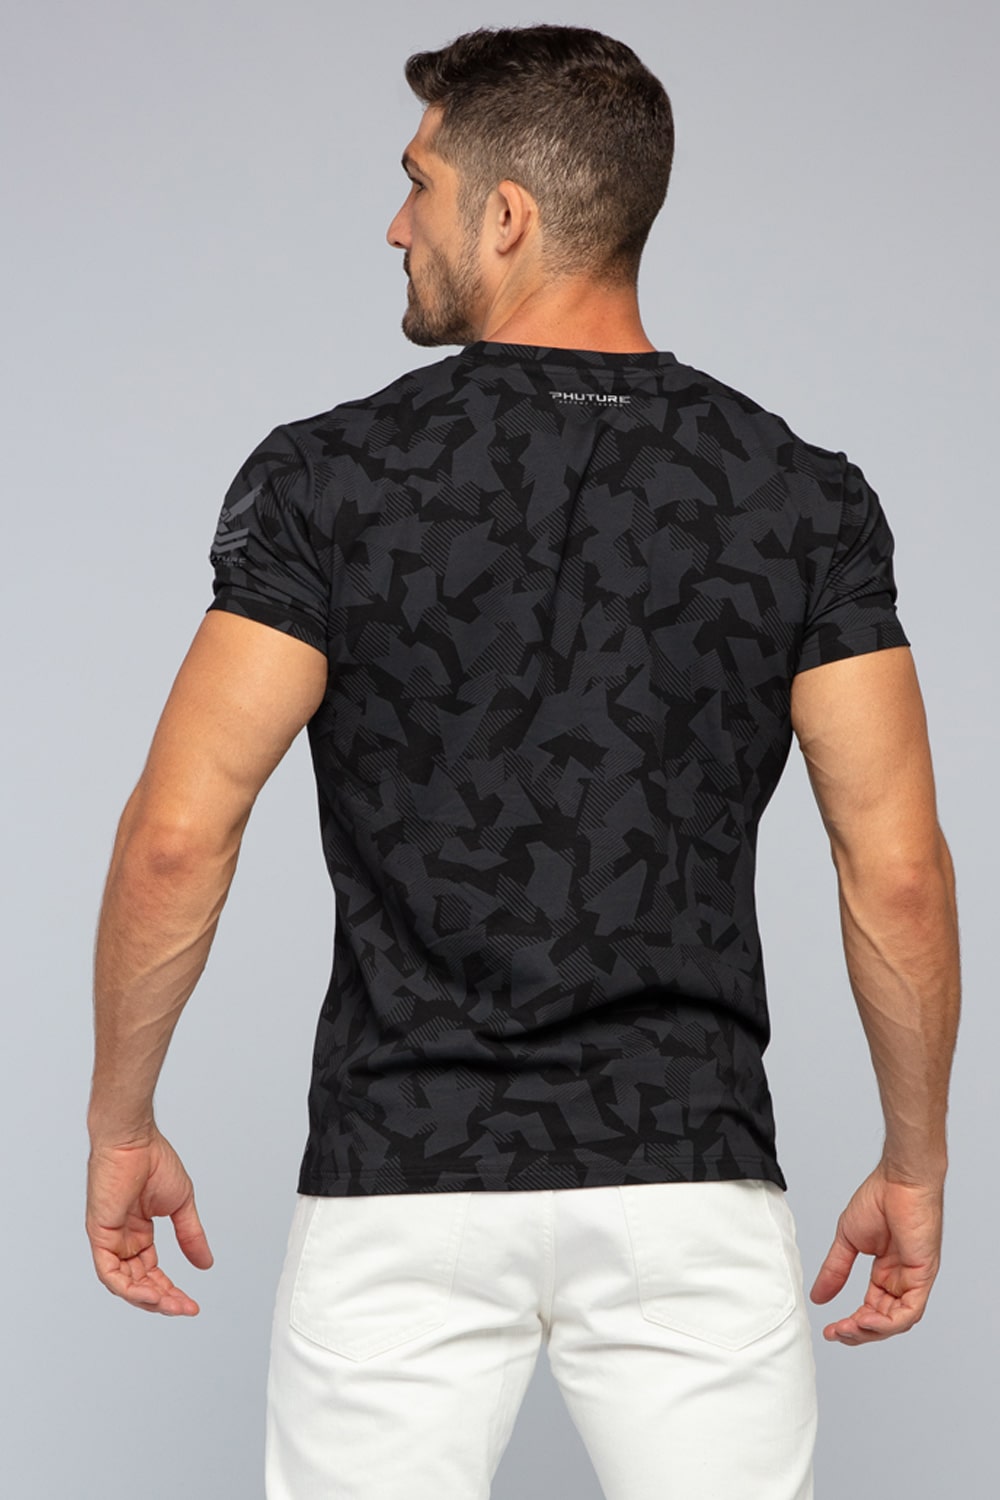 Stealth Camo GT Camouflage T-shirt for Men - – PHUTURE